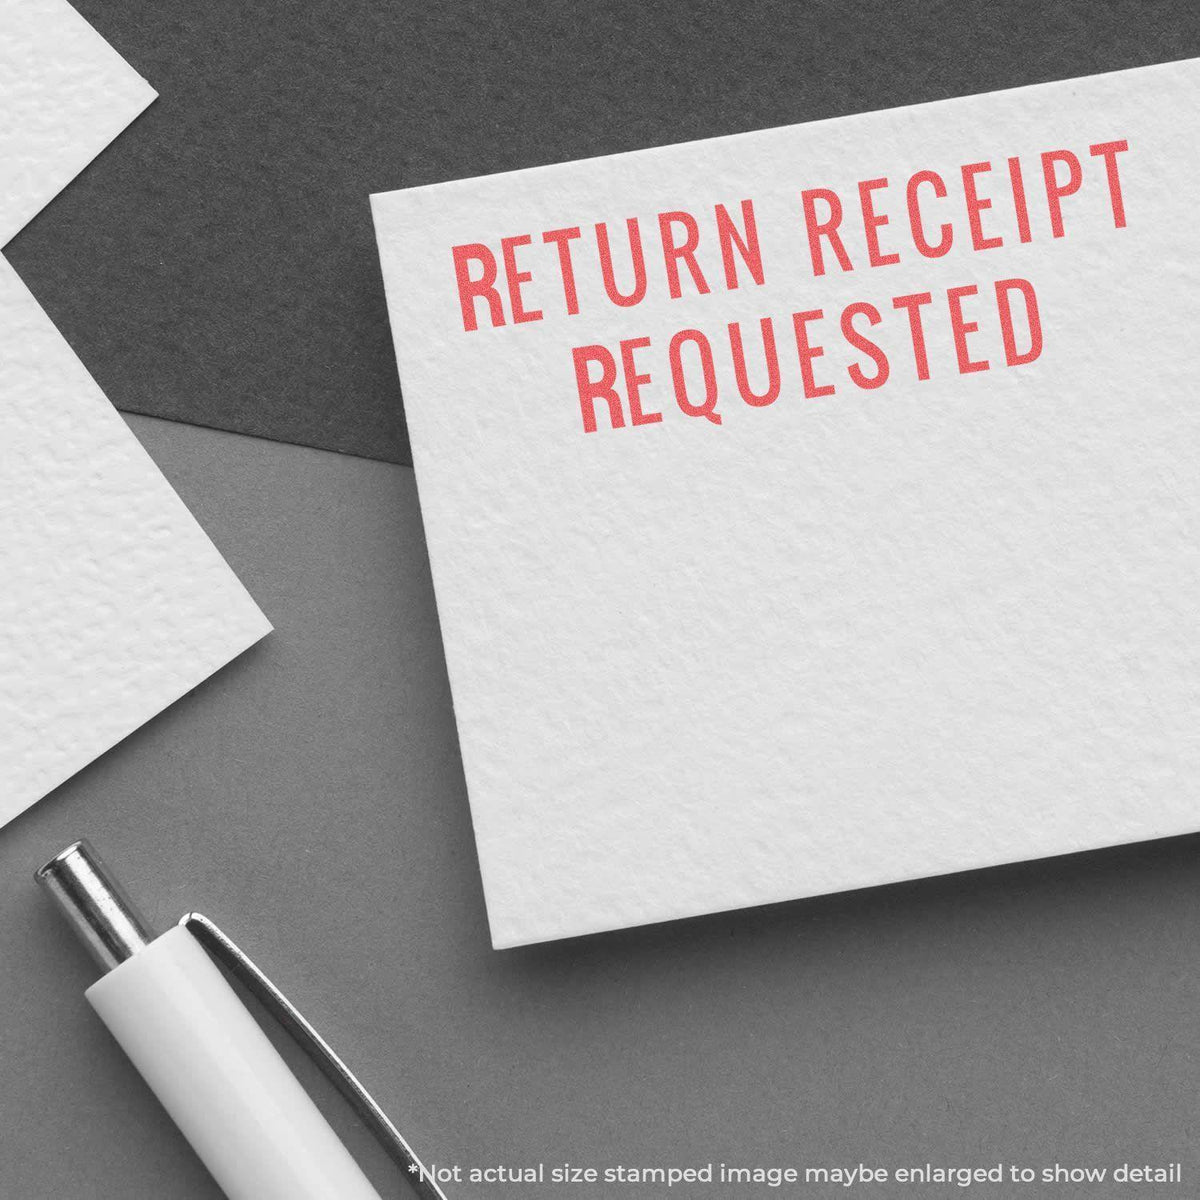 Return Receipt Requested Xstamper Stamp In Use